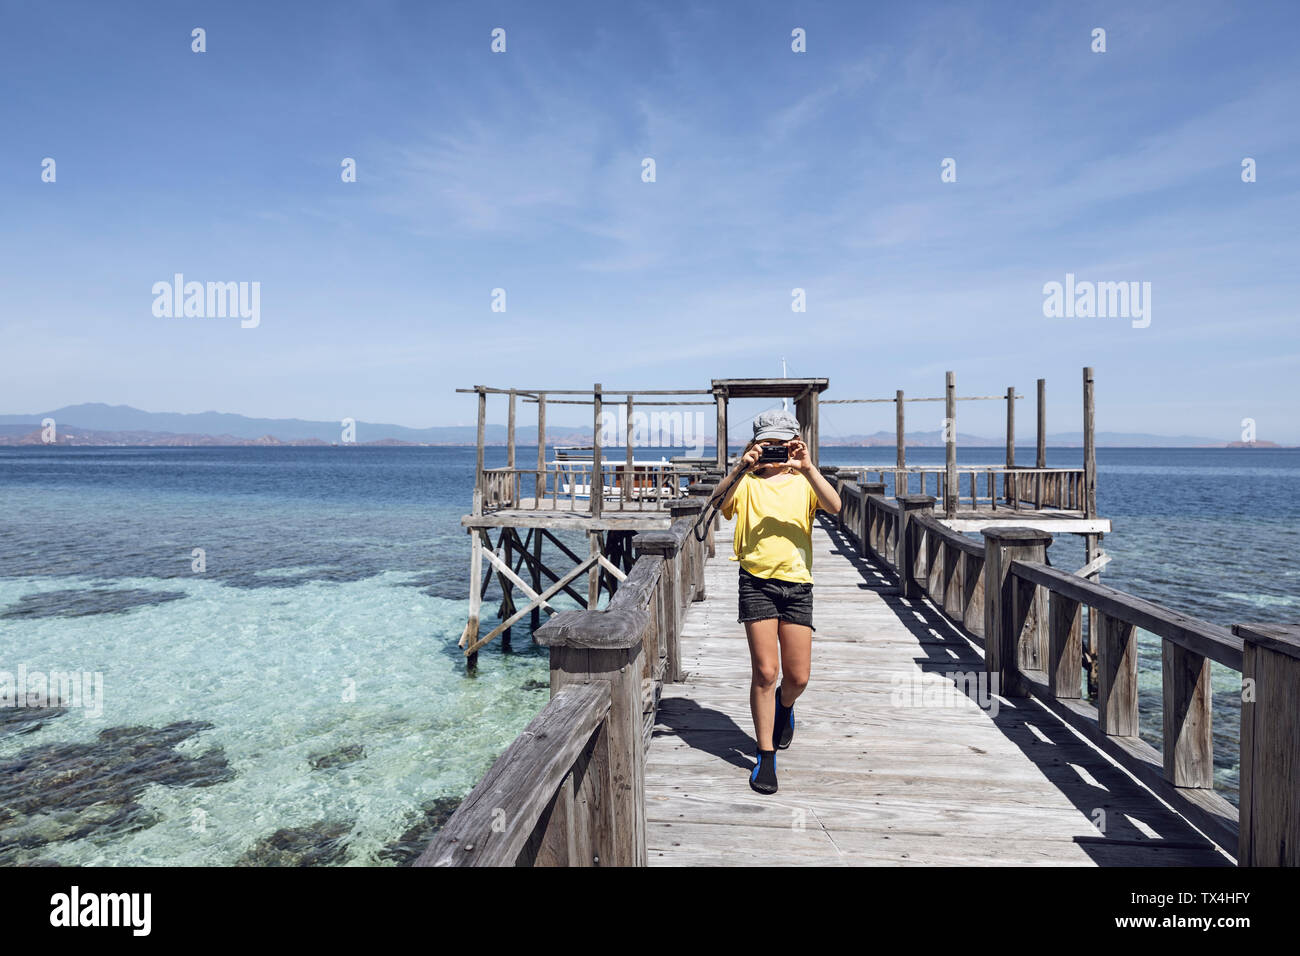 Indonesia, Komodo National Park, girl on a jetty taking a picture Stock Photo